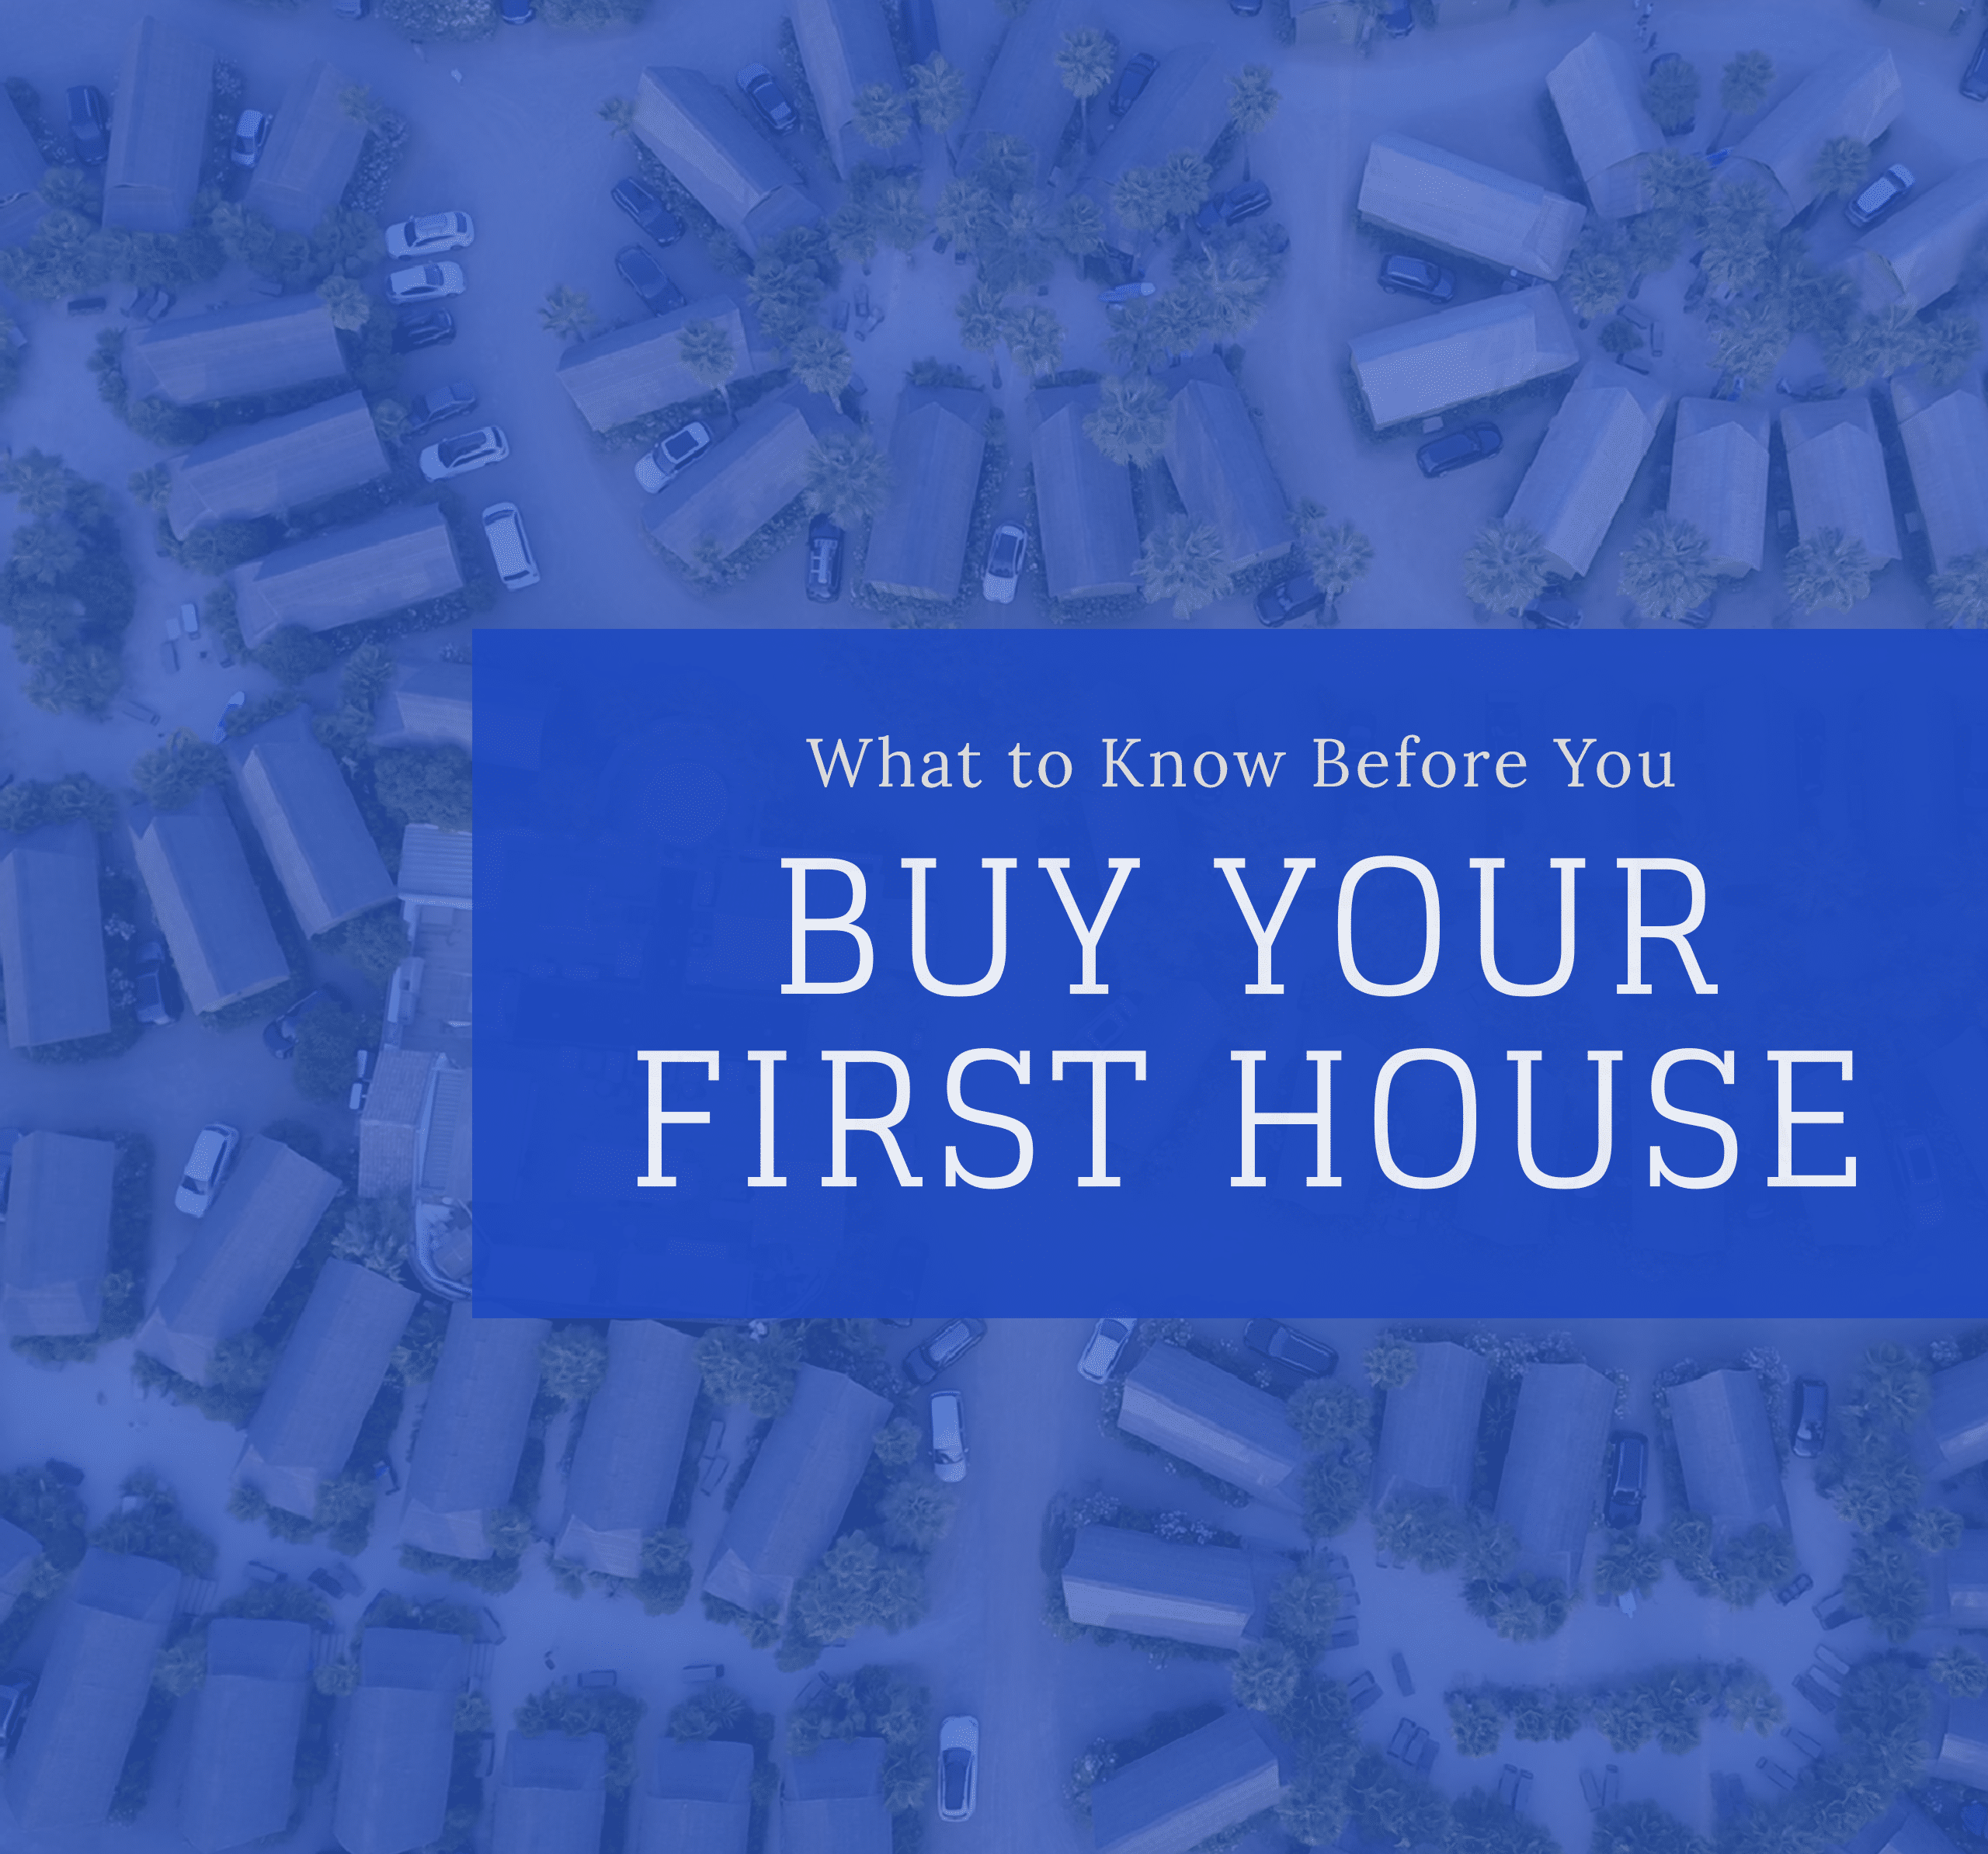 What to Know Before You Buy Your First House